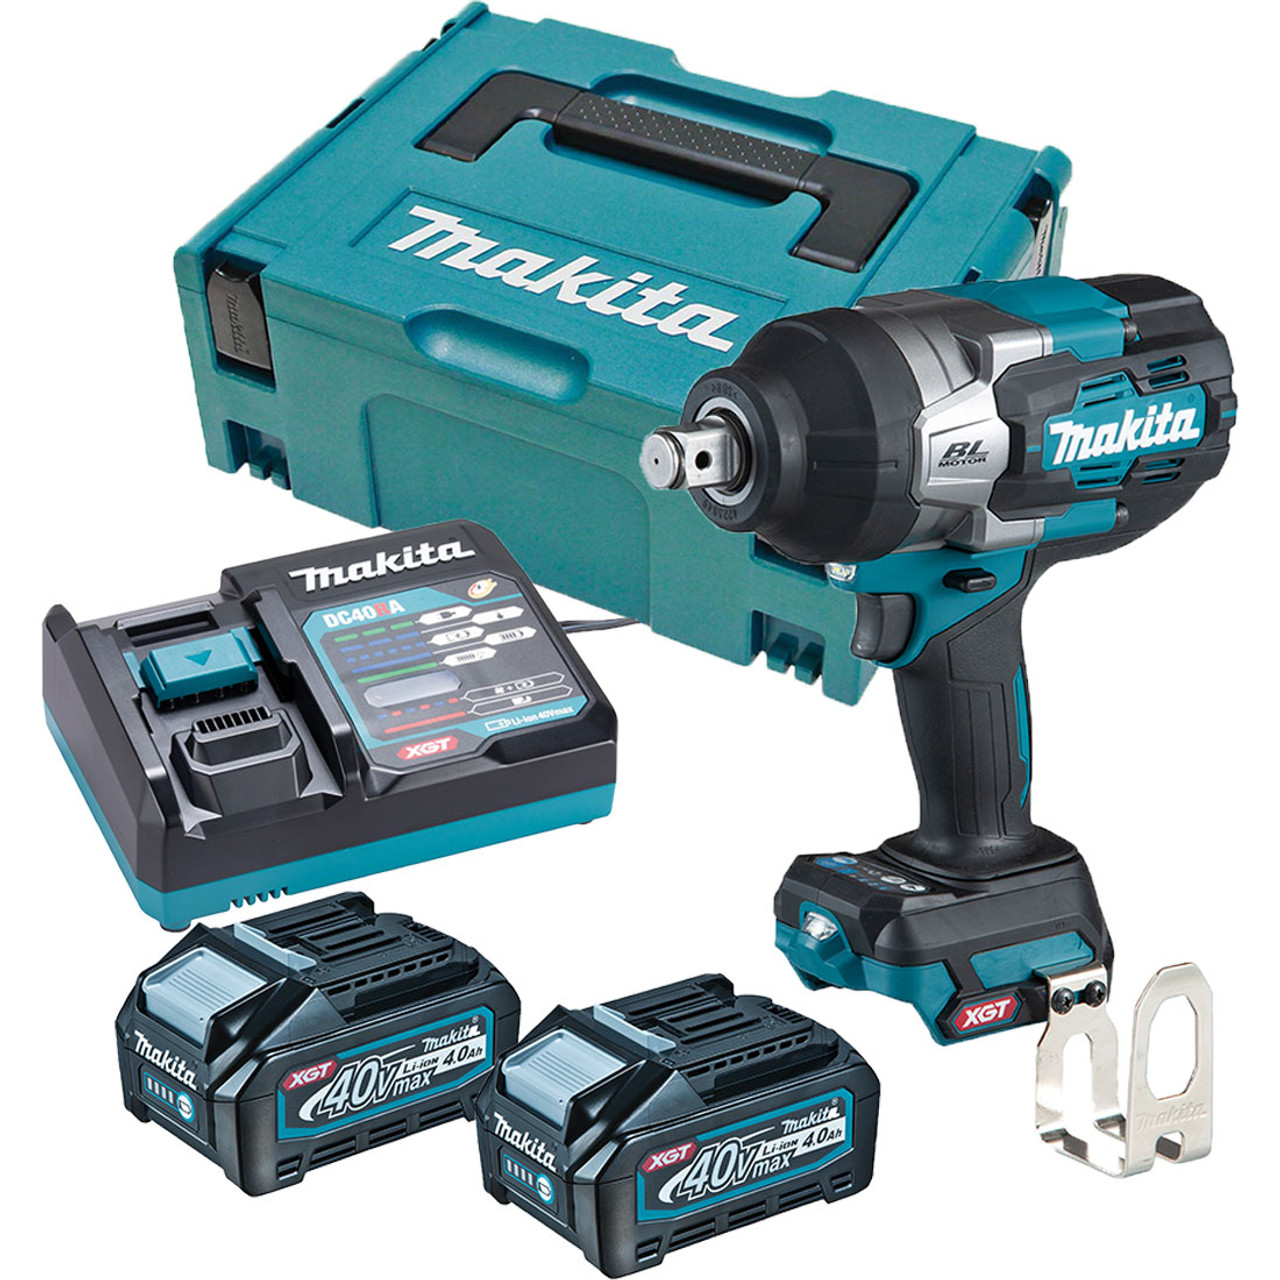 makita 1,800NM TW001G Cordless Impact Wrench at best price in